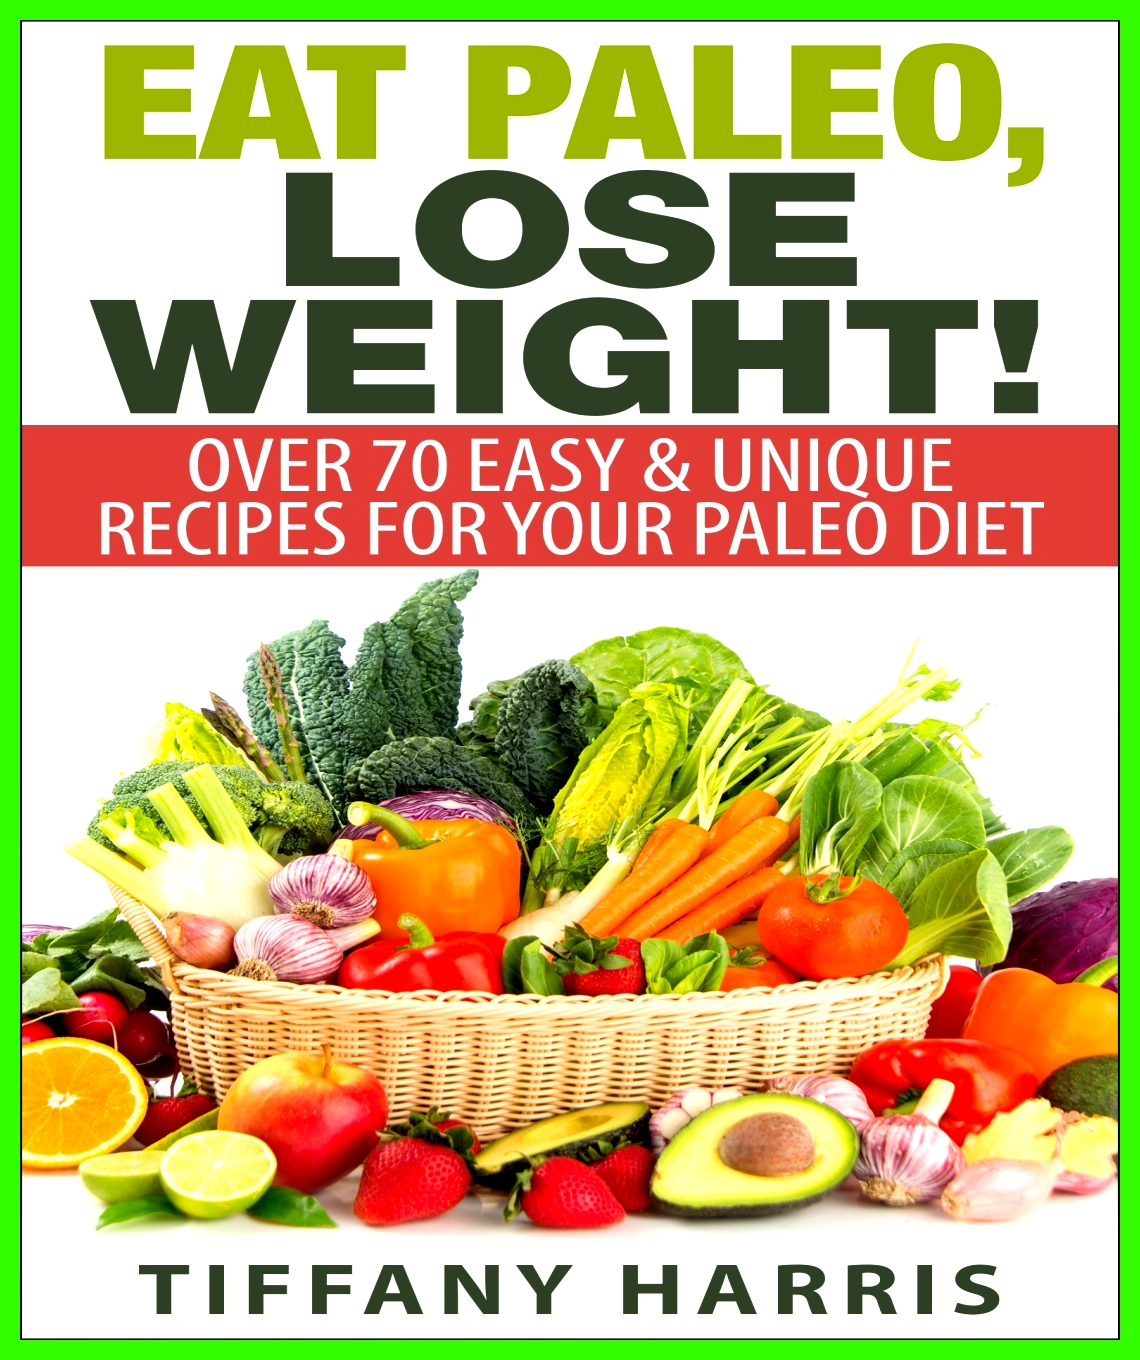 Eat Paleo, Lose Weight!: Over 70 Easy & Unique Recipes for Your Paleo Diet by Tiffany Harris